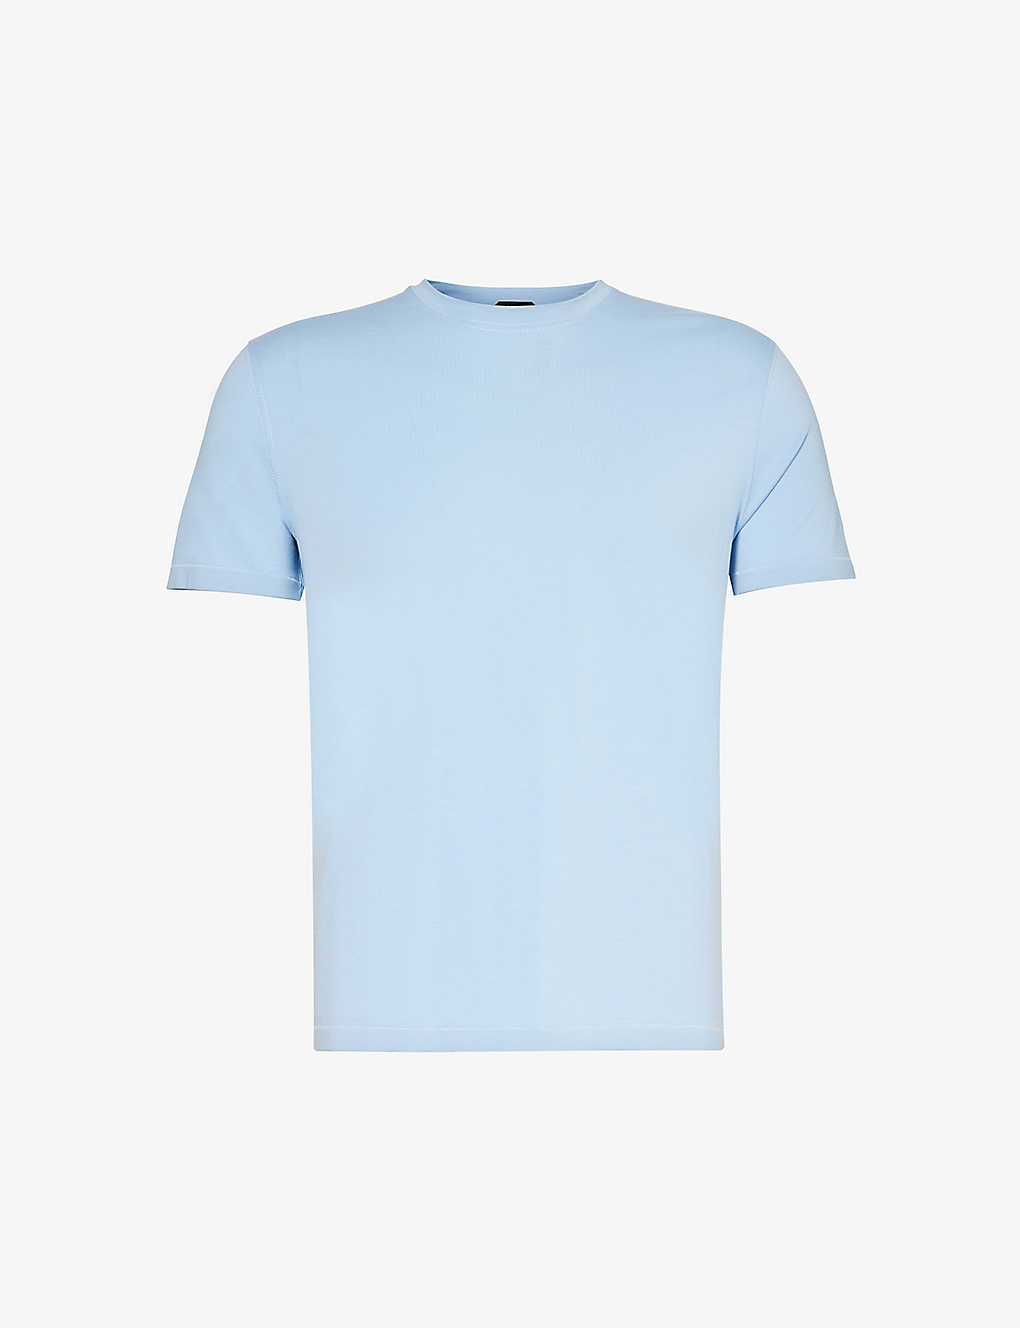 Tom Ford Brand-embroidered Crewneck Woven T-shirt In Blue